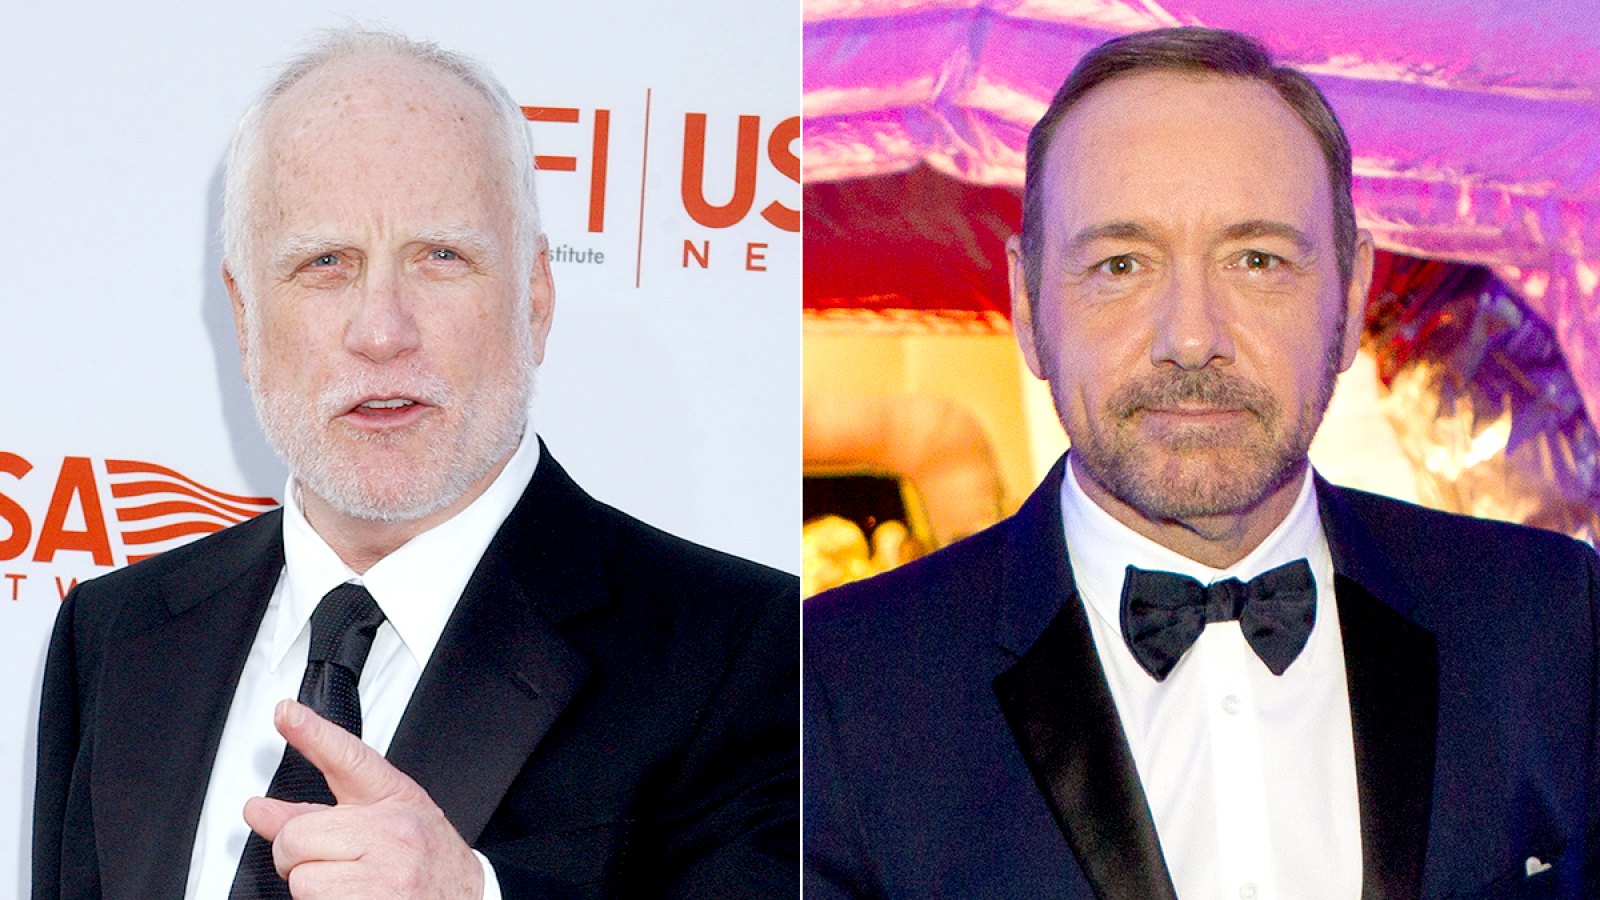 Richard-Dreyfuss-Praises-Son-Harry-for-Speaking-Out-About-Alleged-Kevin-Spacey-Harassment